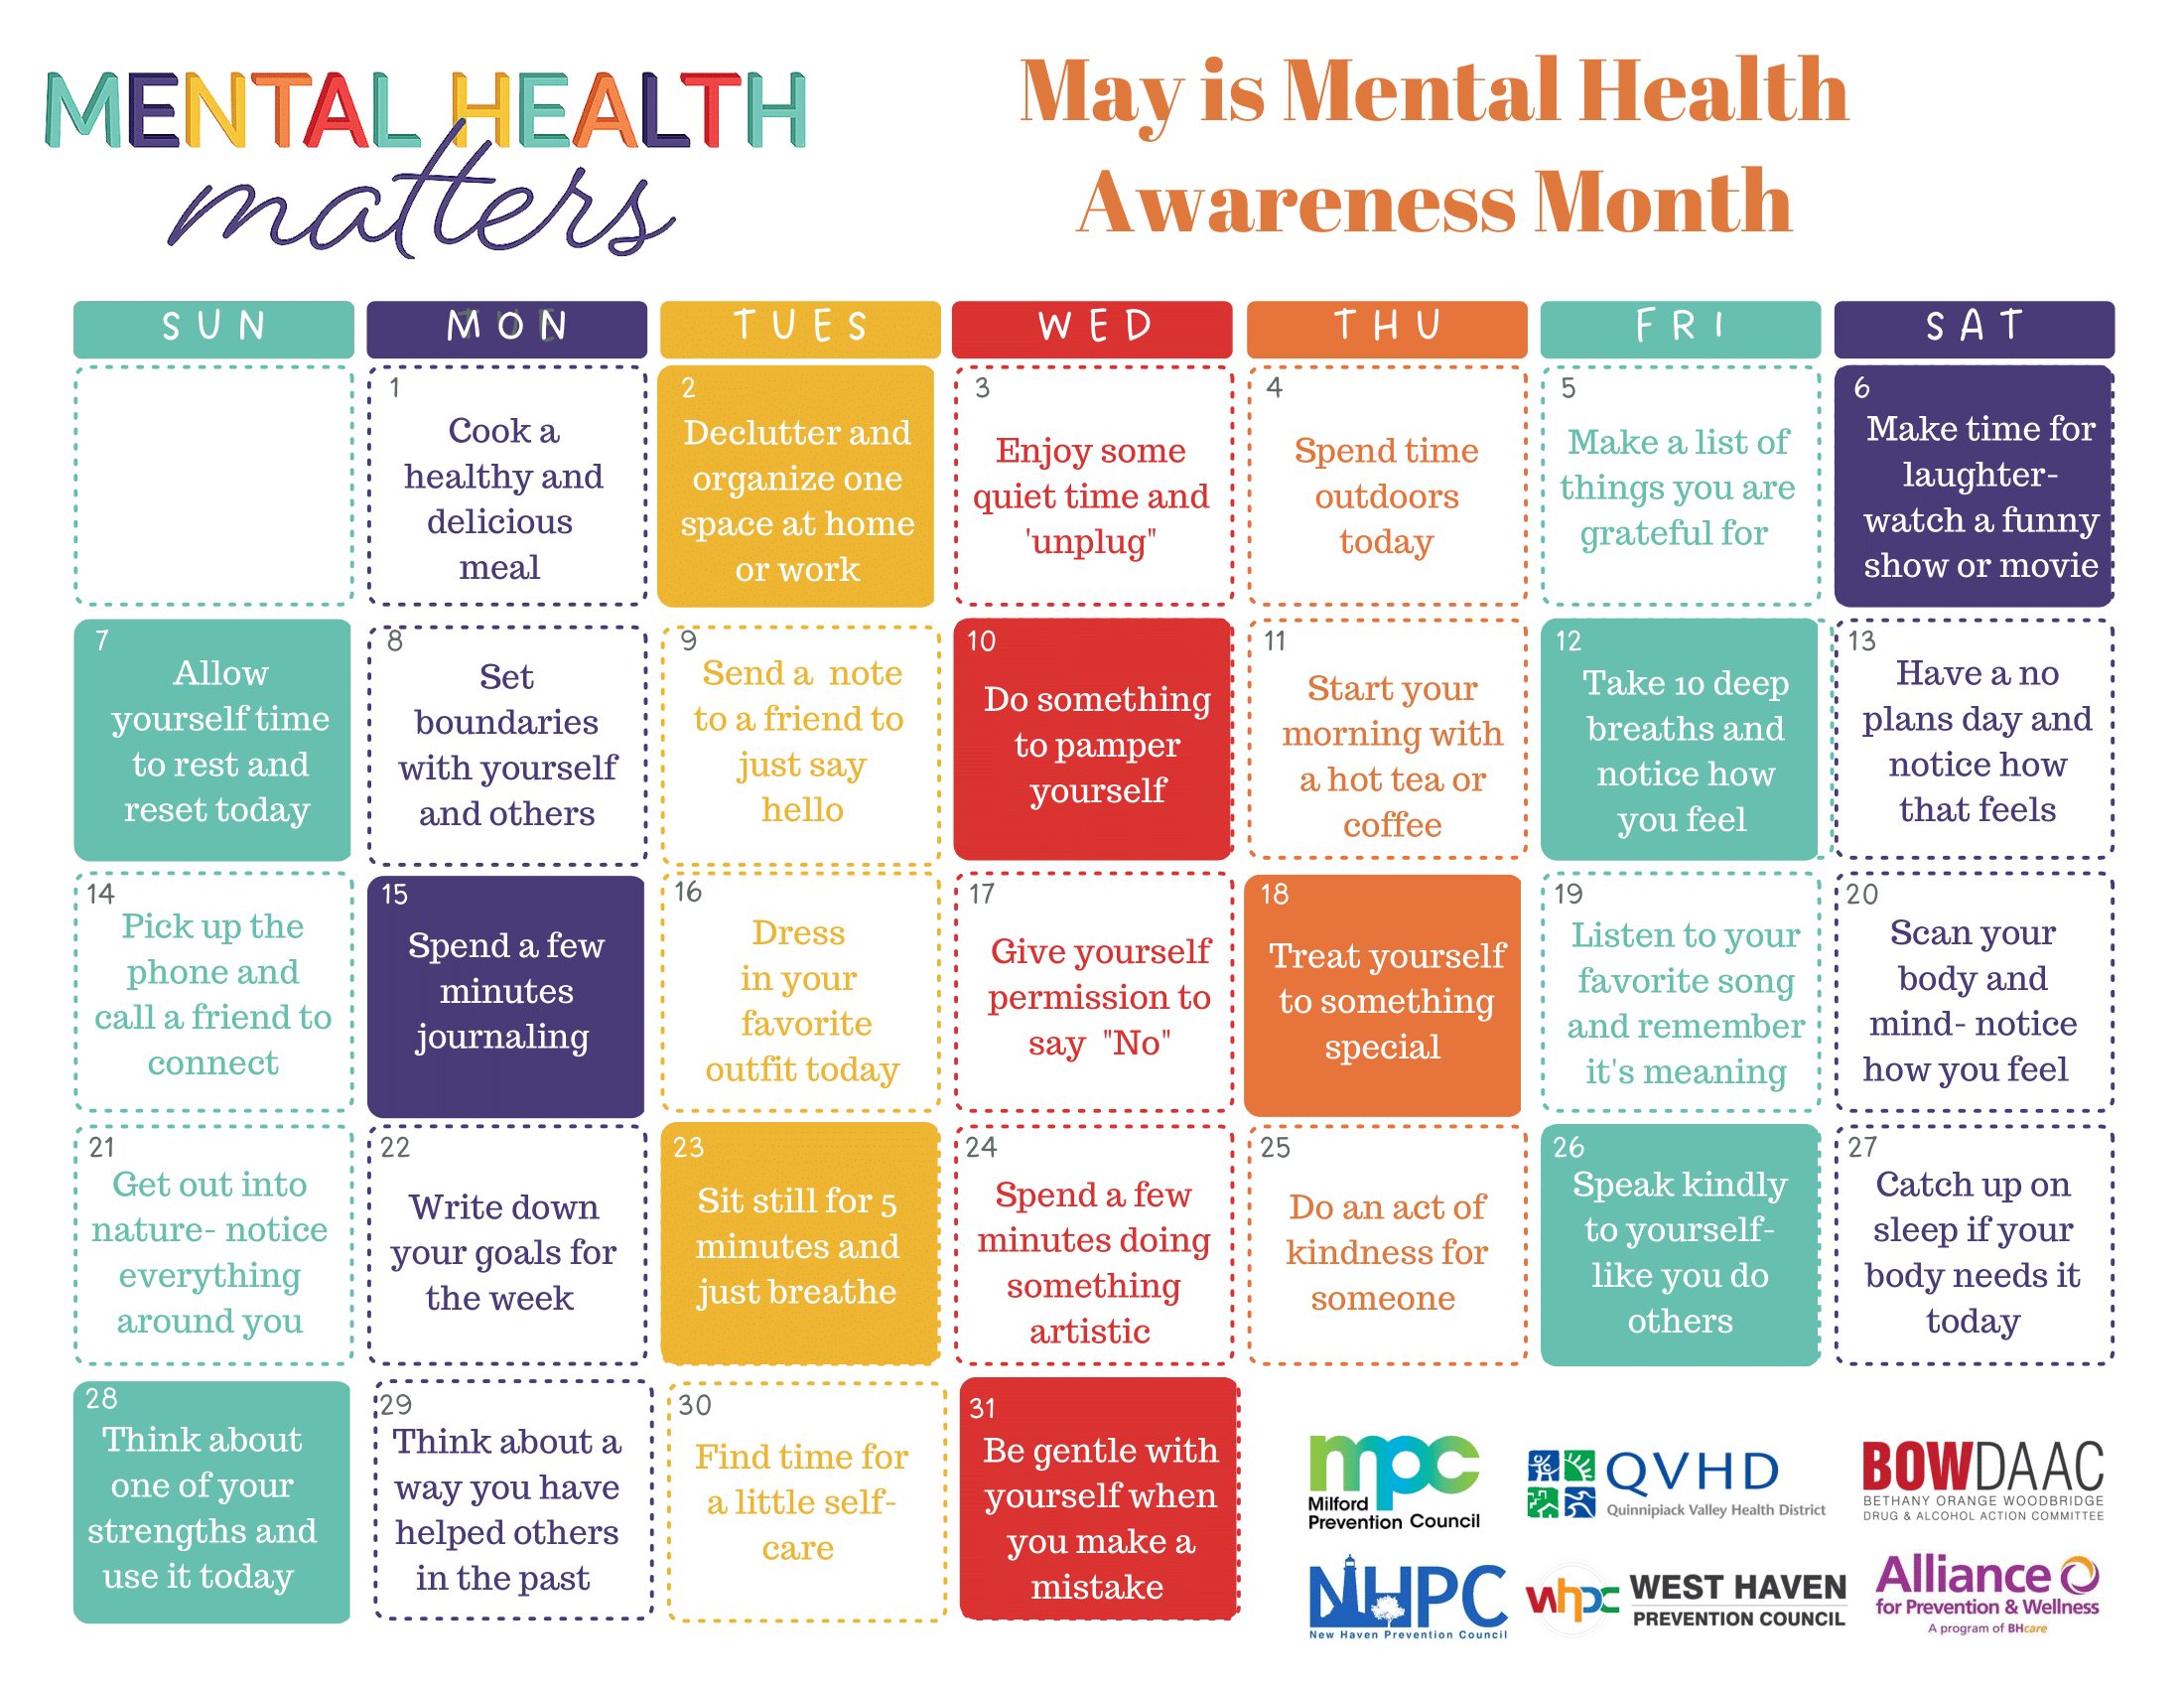 mental-health-matters-may-calendar-alliance-for-prevention-and-wellness